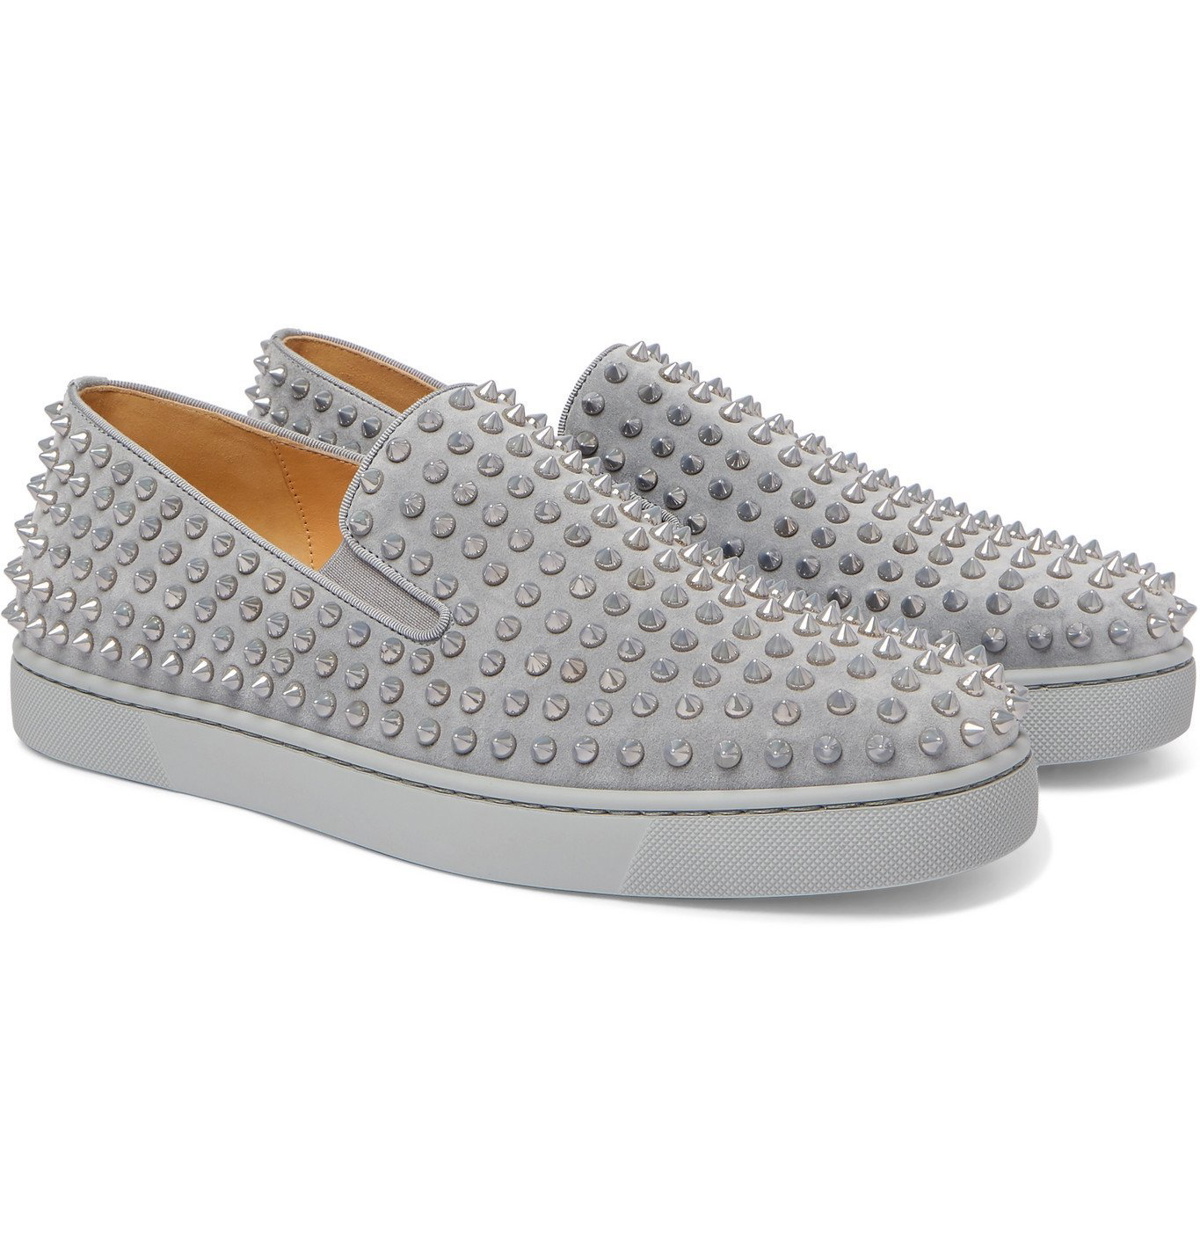 CHRISTIAN LOUBOUTIN - Roller-Boat Spiked Suede Slip-On Sneakers